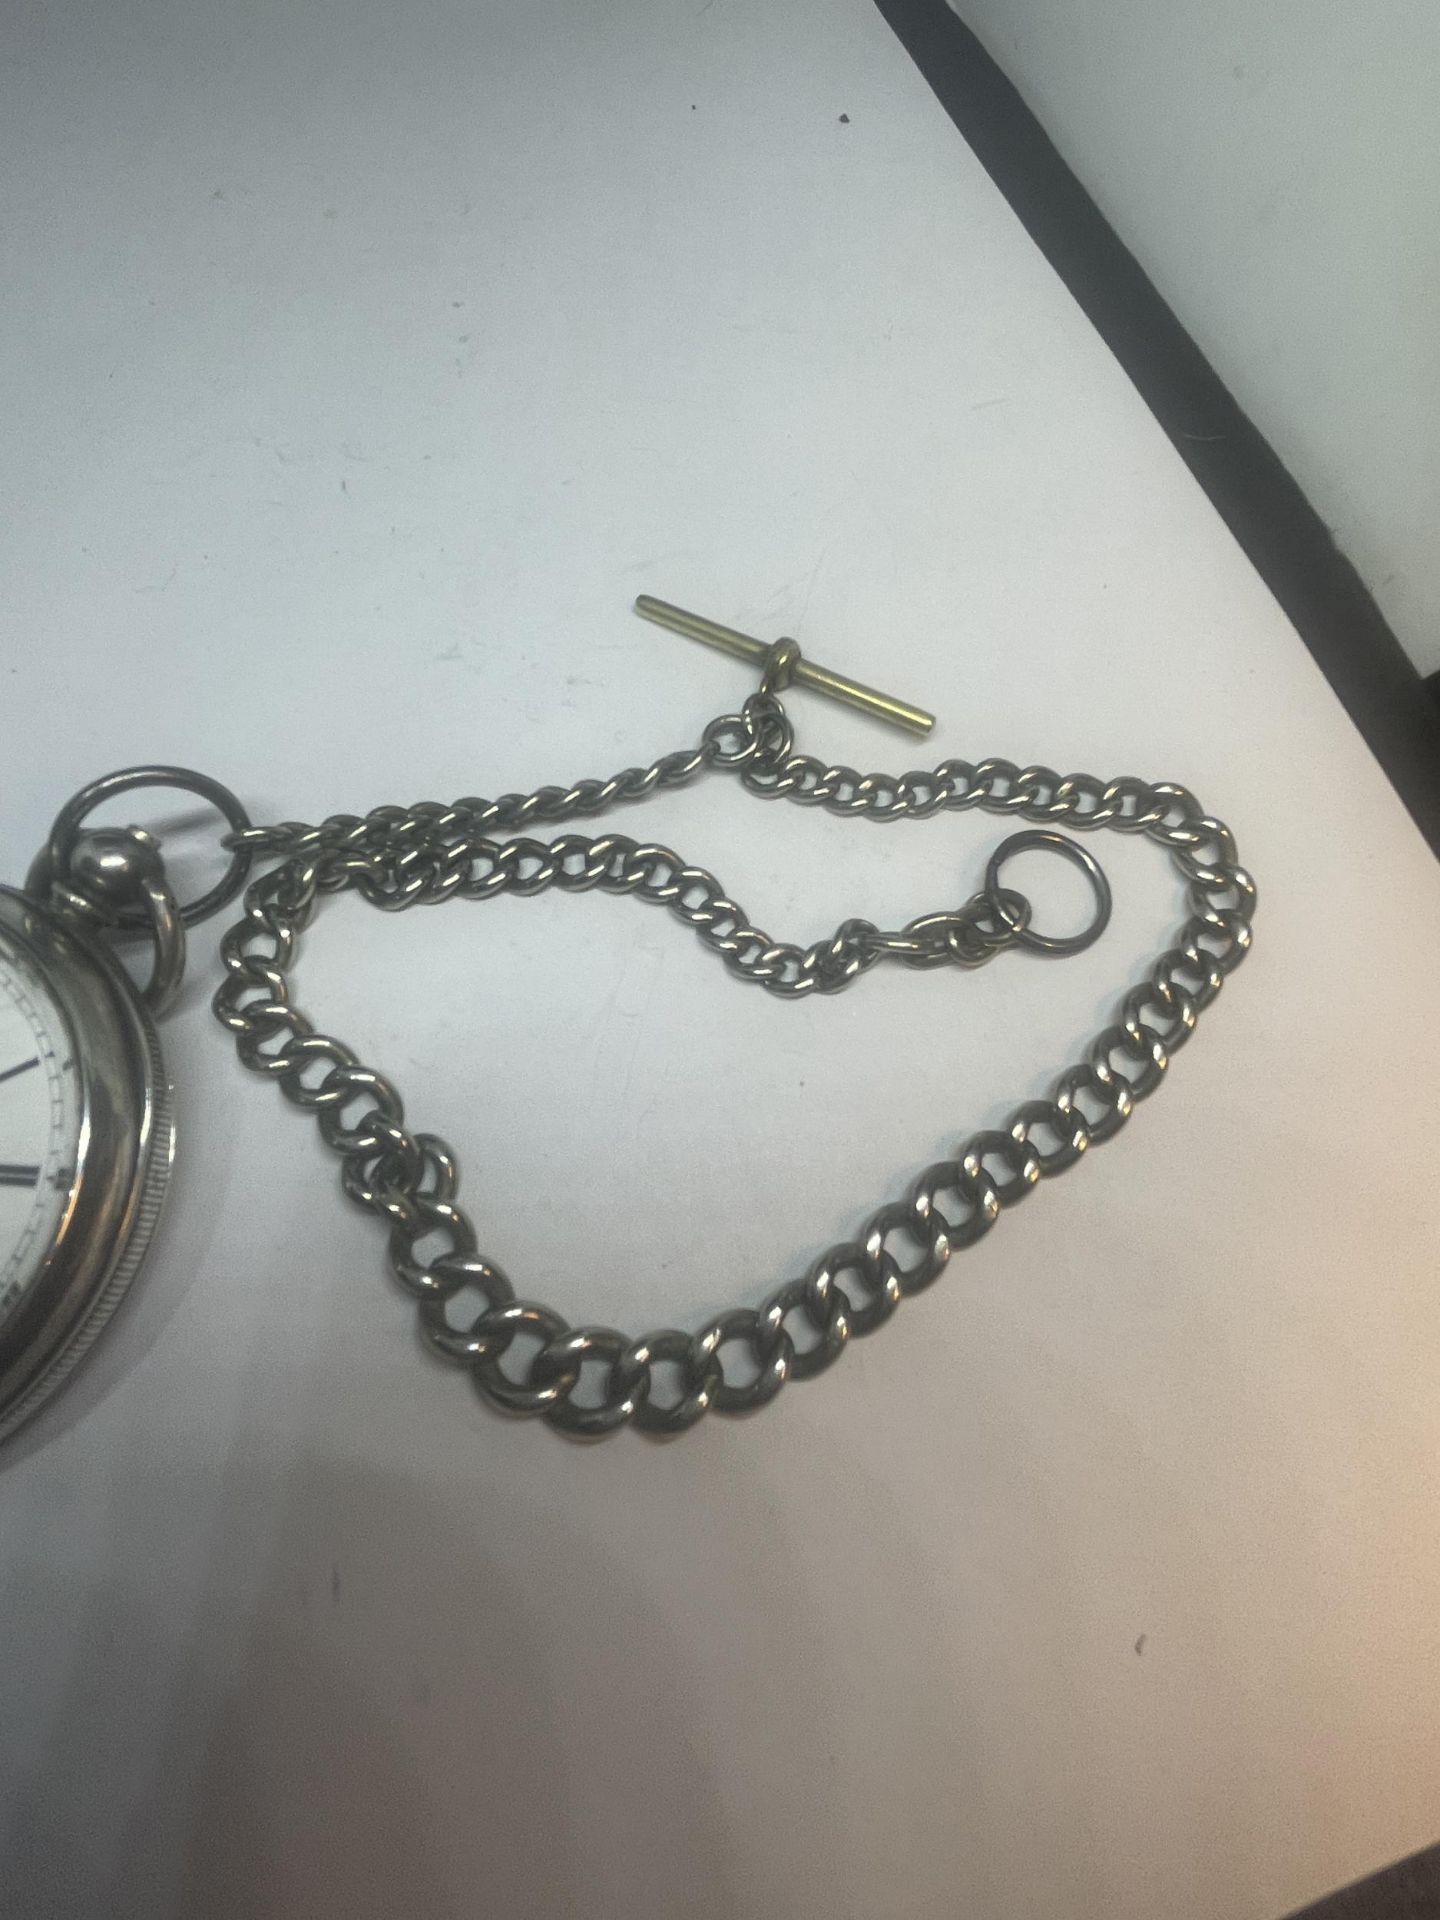 A MARKED 925 SILVER SWISS KAYS CHALLENGE POCKET WATCH WITH T BAR CHAIN VENDOR STATES WORKING BUT - Image 4 of 5